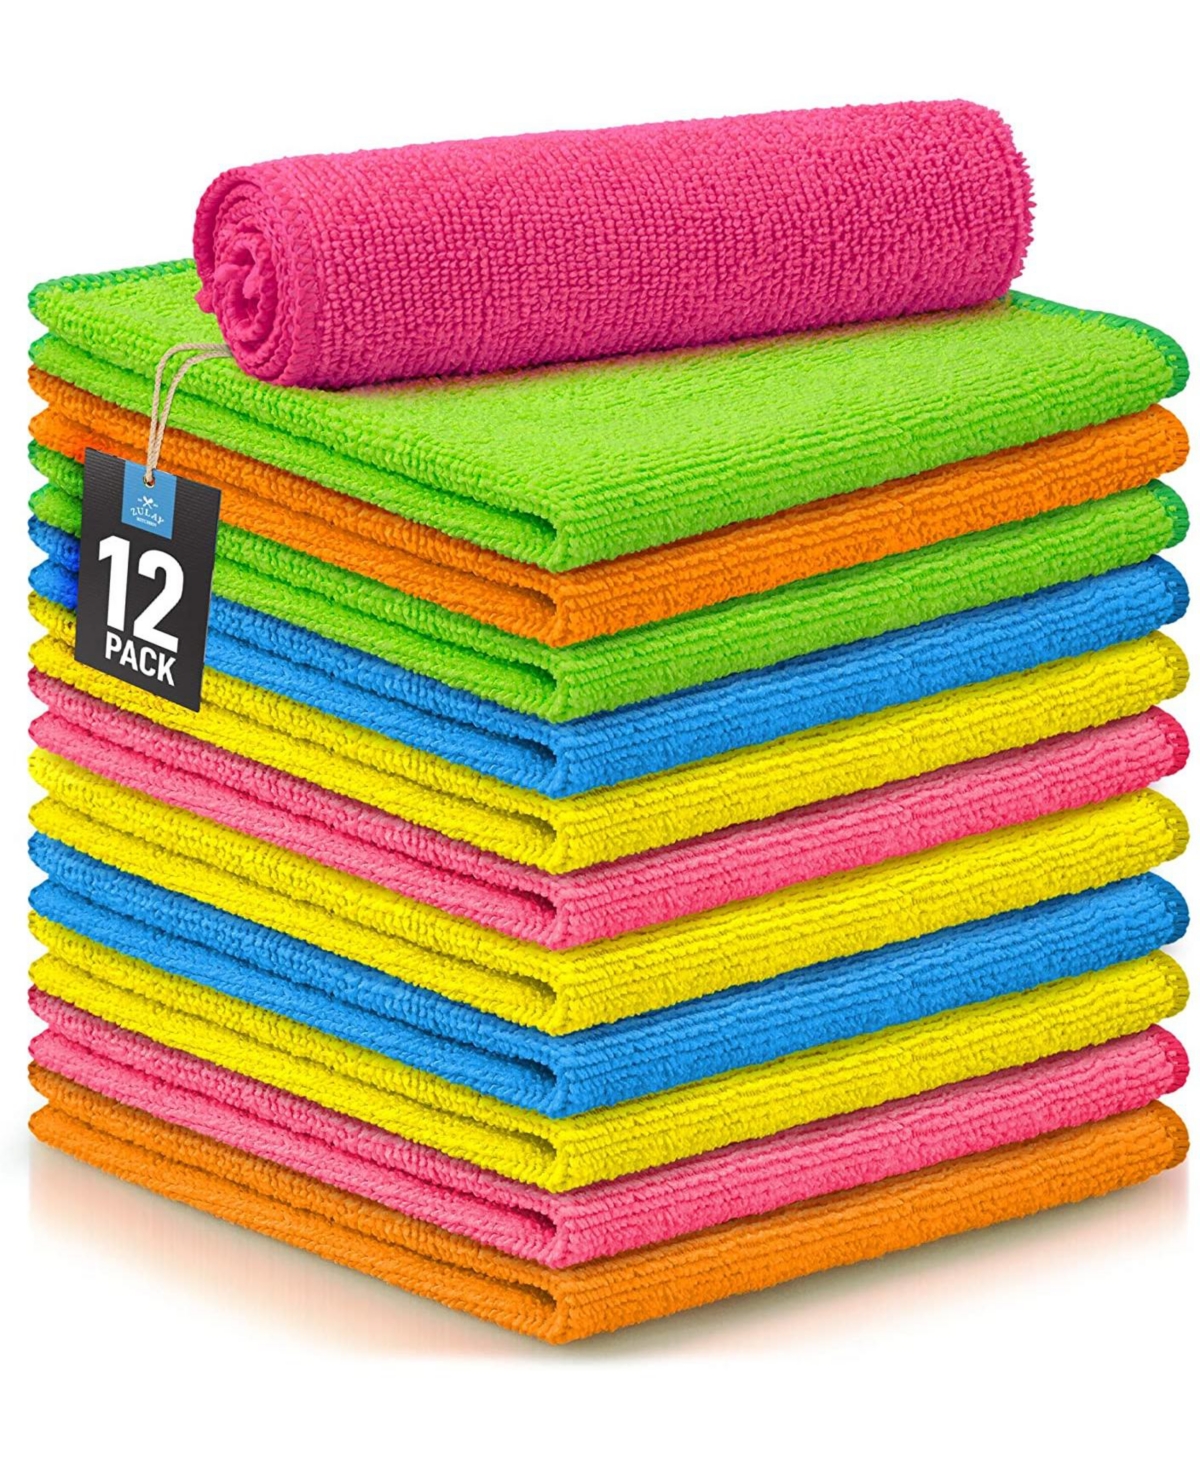 12 Pack Highly Absorbent Microfiber Cleaning Cloths - Assorted Pre-pack